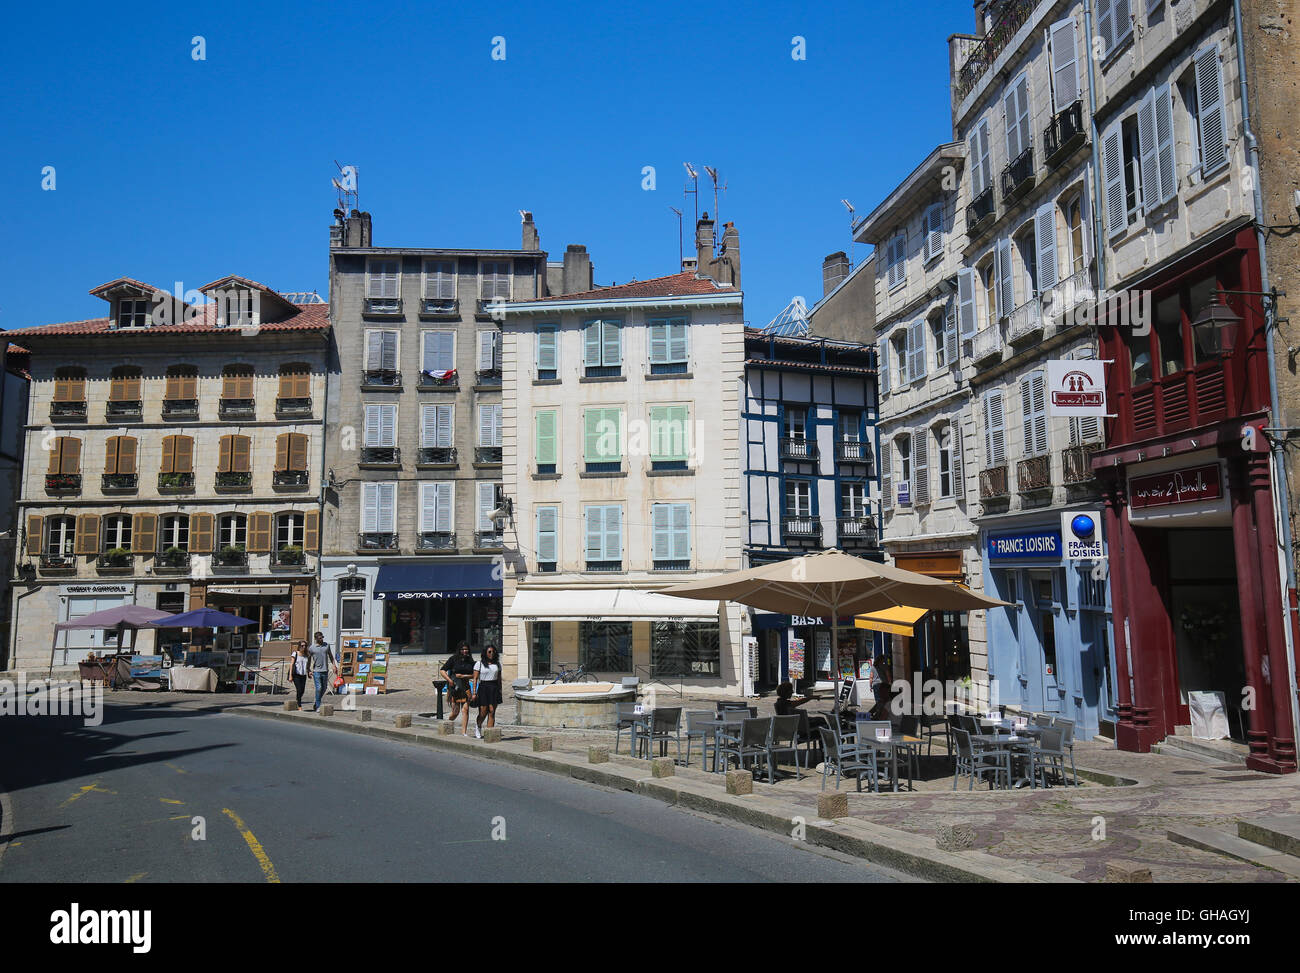 BAYONNE, FRANCE - JULY 9, 2016: Old houses in the center of Bayonne, a city in the Aquitaine region of south-western France. Stock Photo